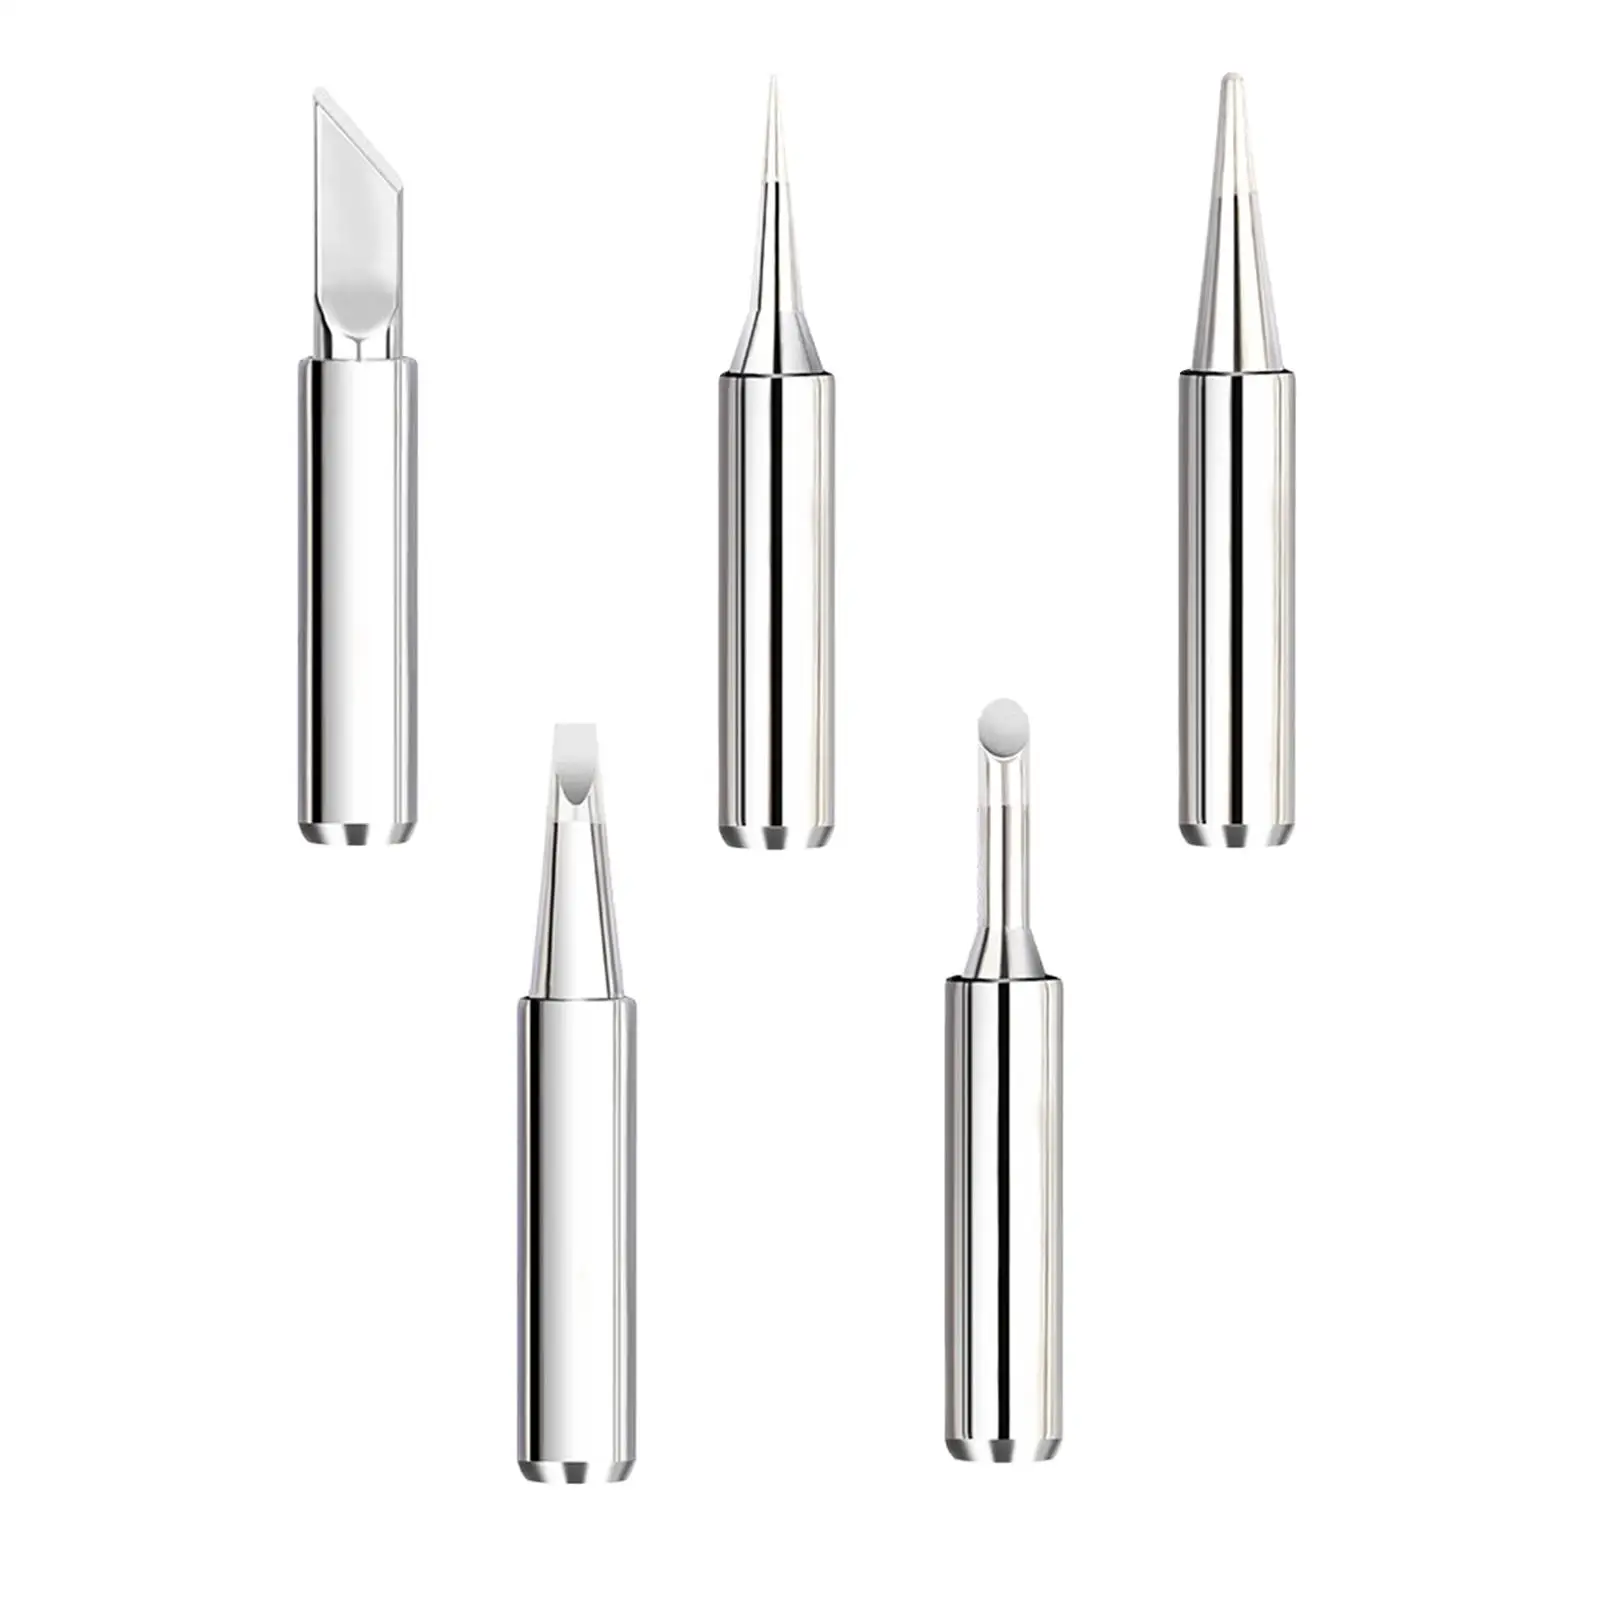 5x Copper Soldering Iron Tips Stable B K 2.4D 3C for Soldering Iron Soldering Station Accessories Replace Replacement